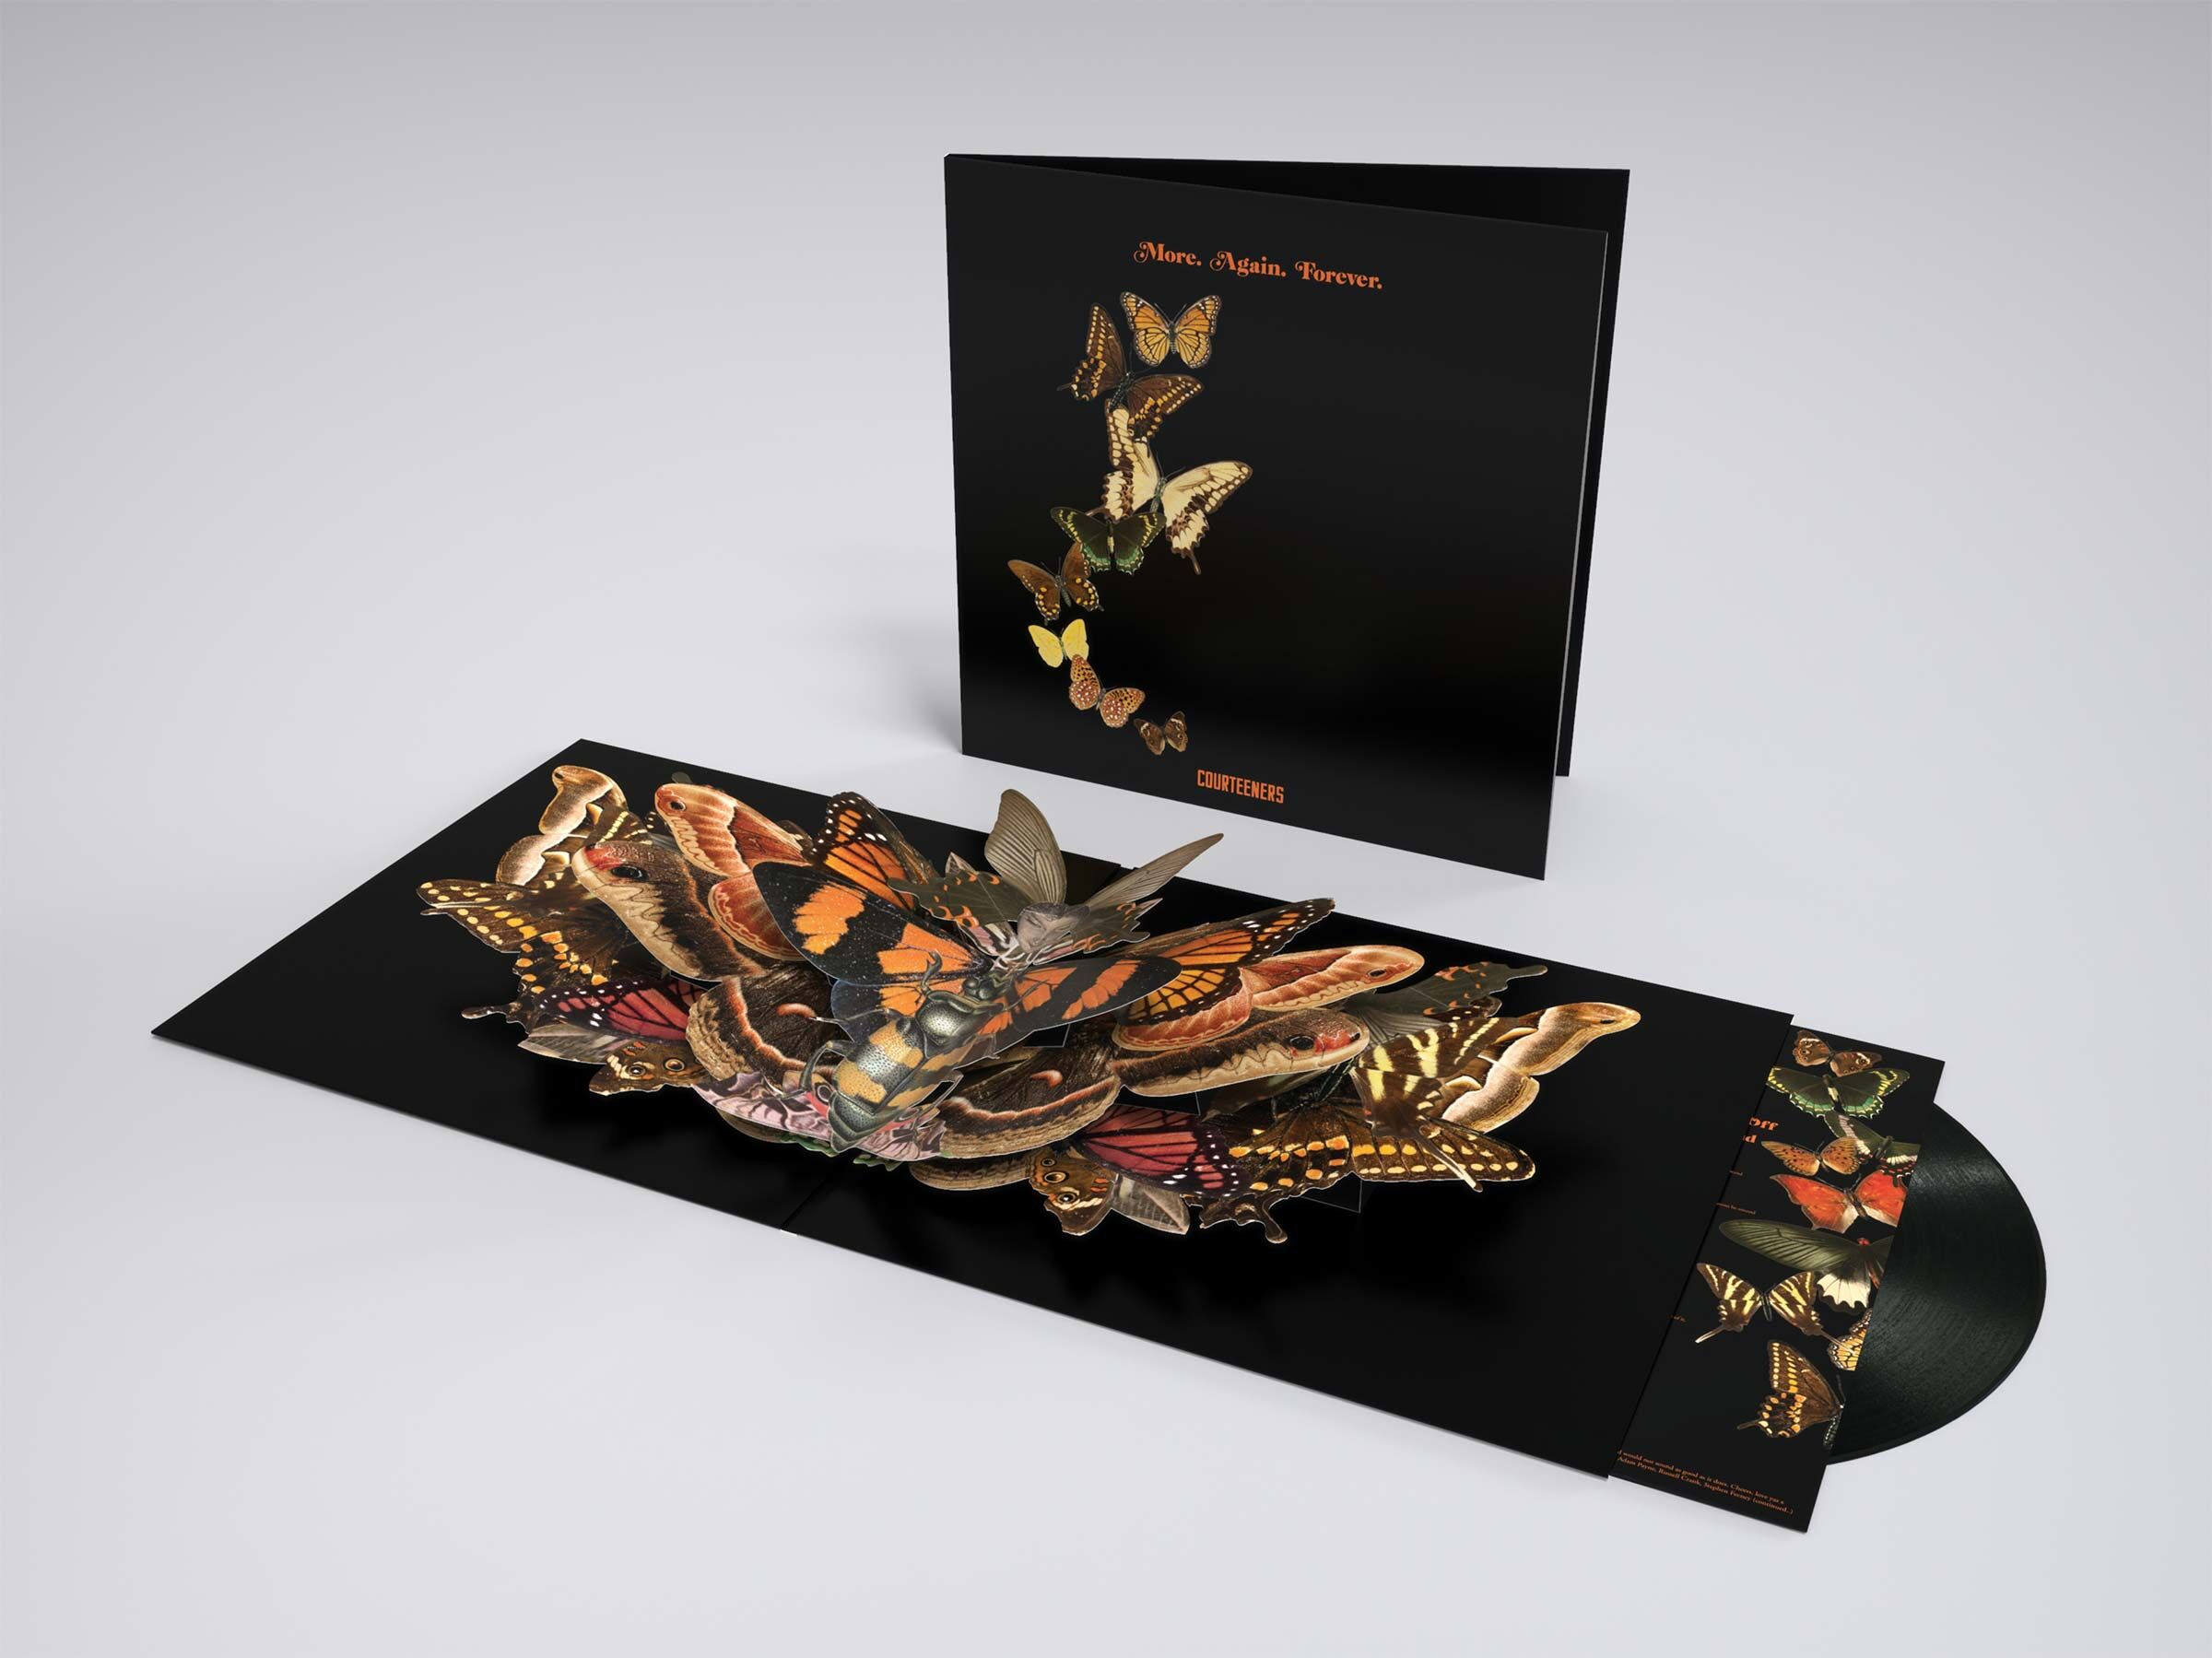 Courteeners ‘More, Again, Forever' gatefold sleeve with popup butterflies.